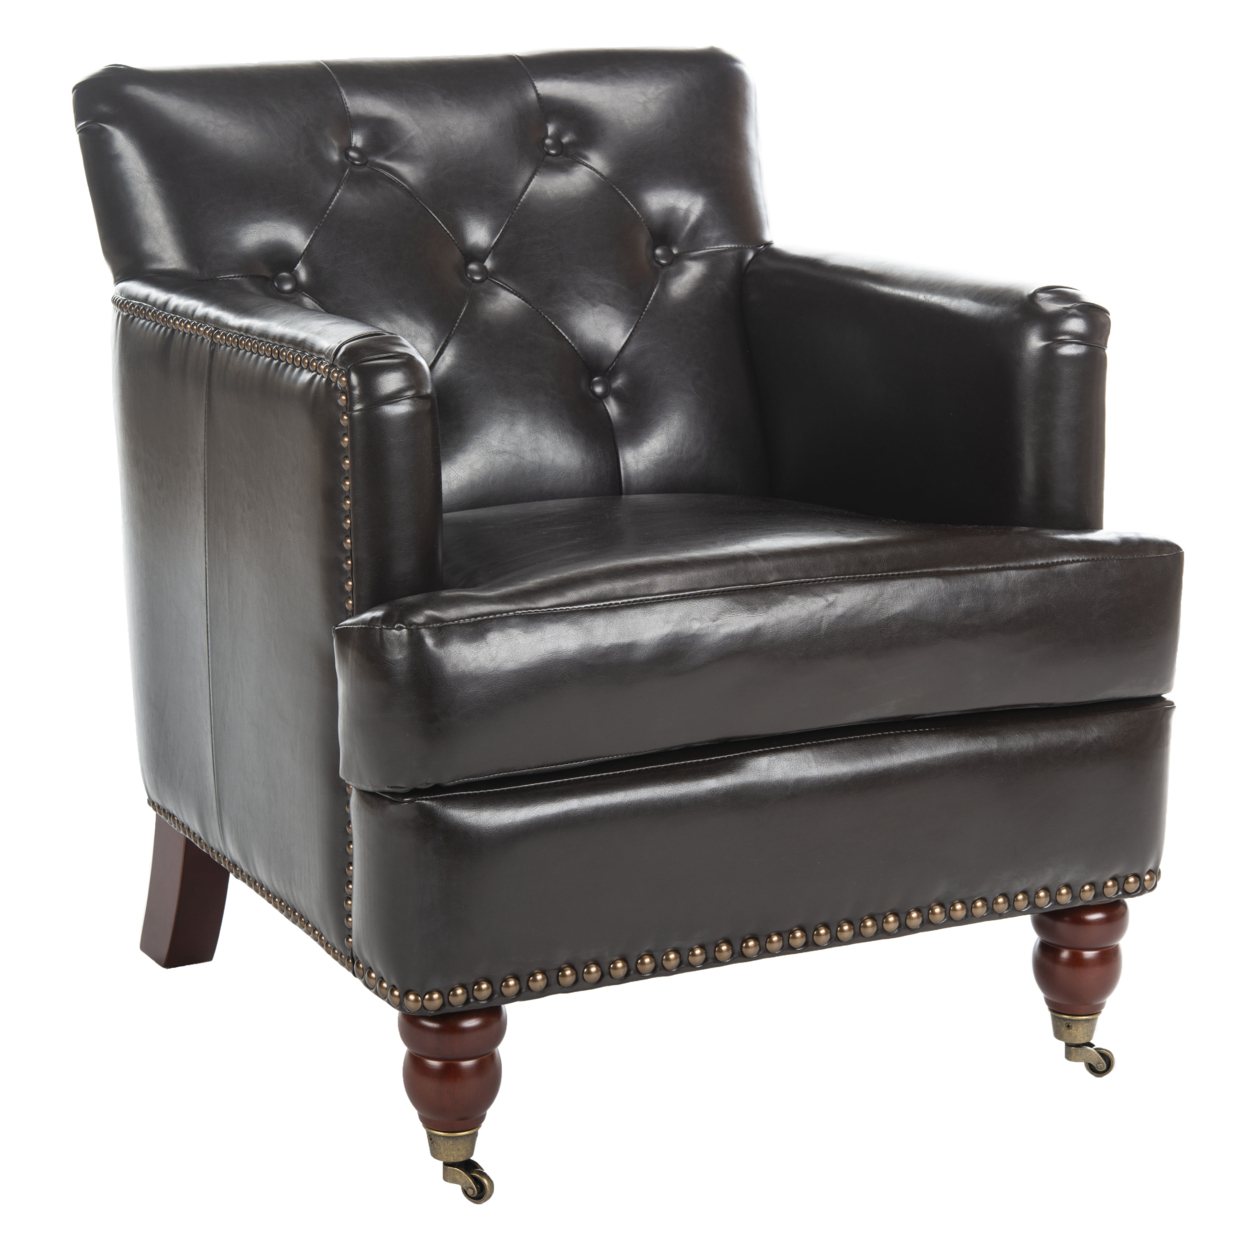 SAFAVIEH Colin Tufted Club Chair Brown / Leather